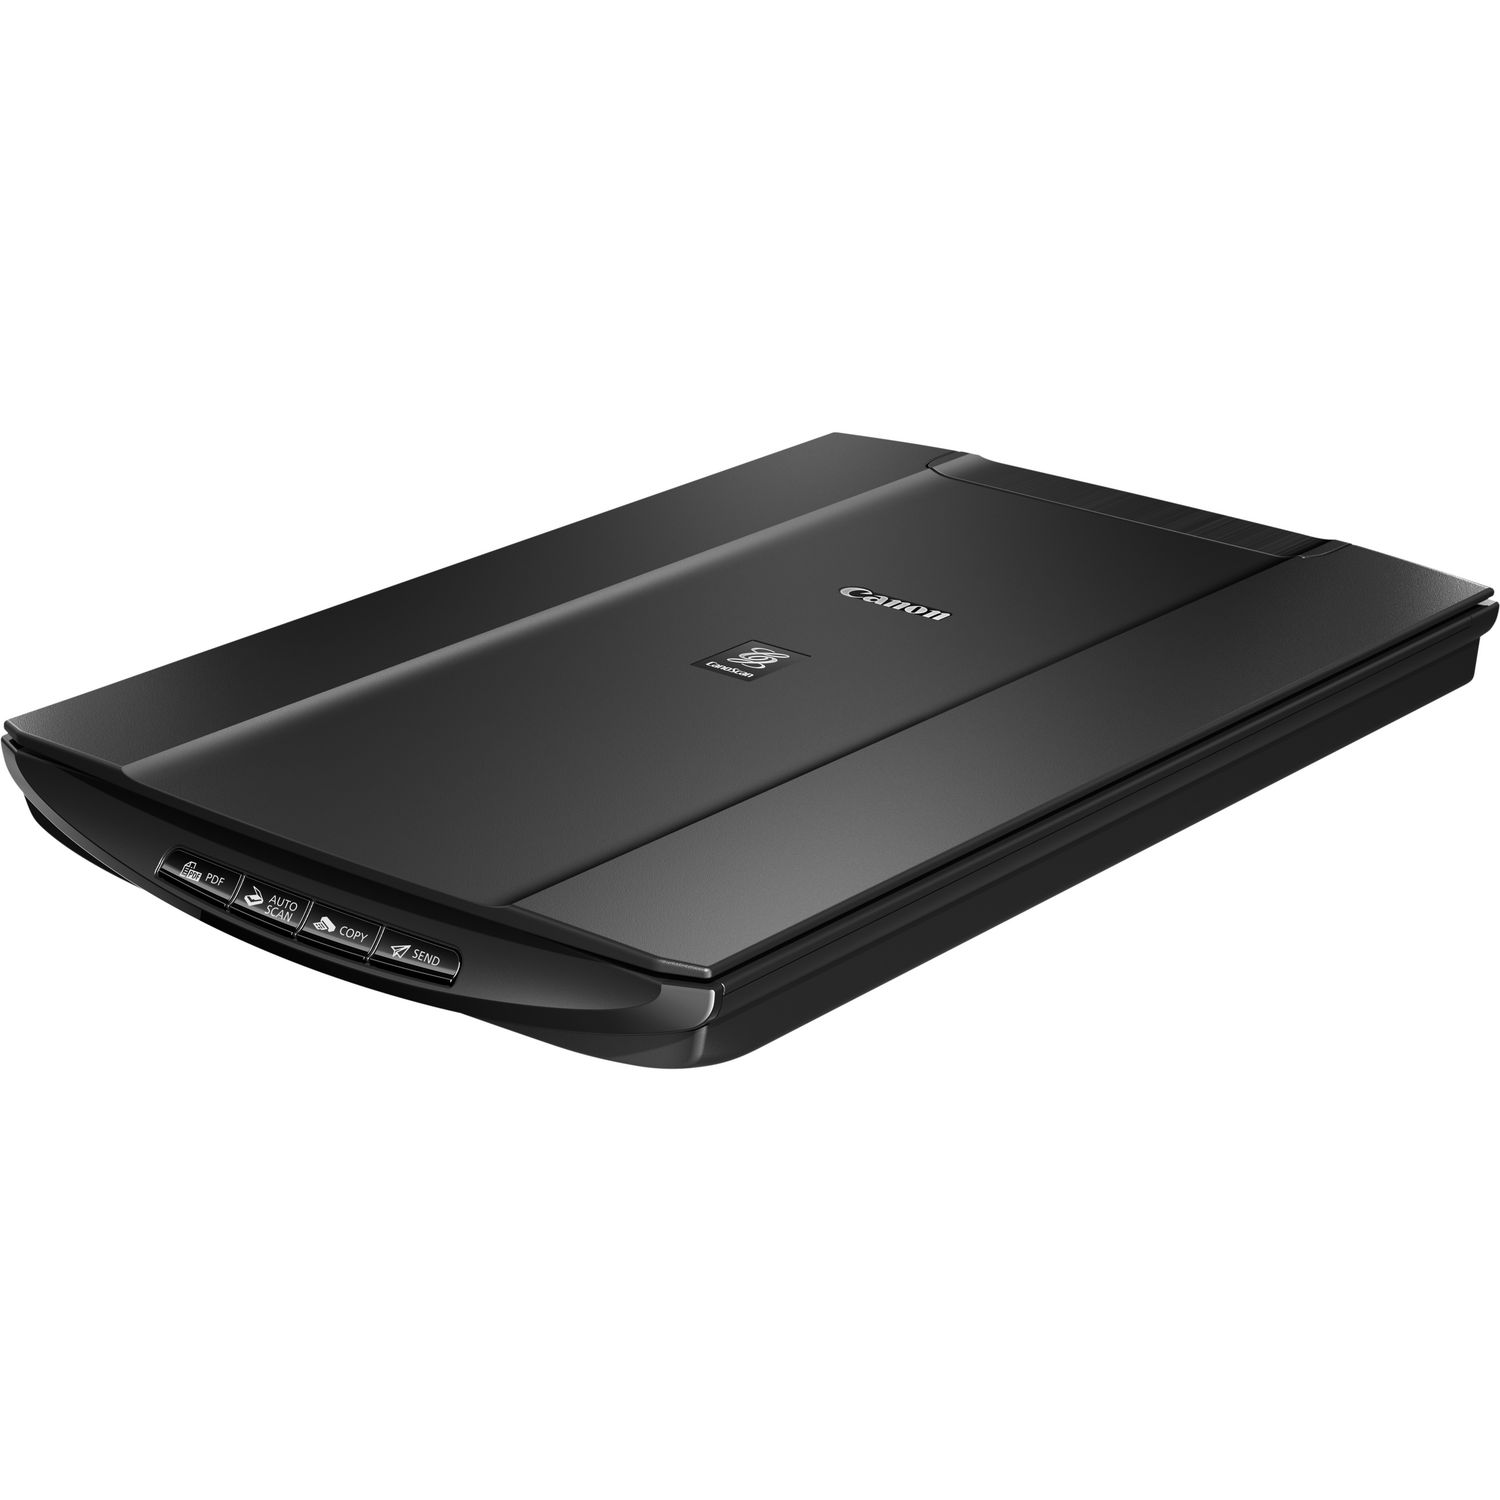 Buy Canon CanoScan LiDE 120 in Home scanners — Canon UK Store